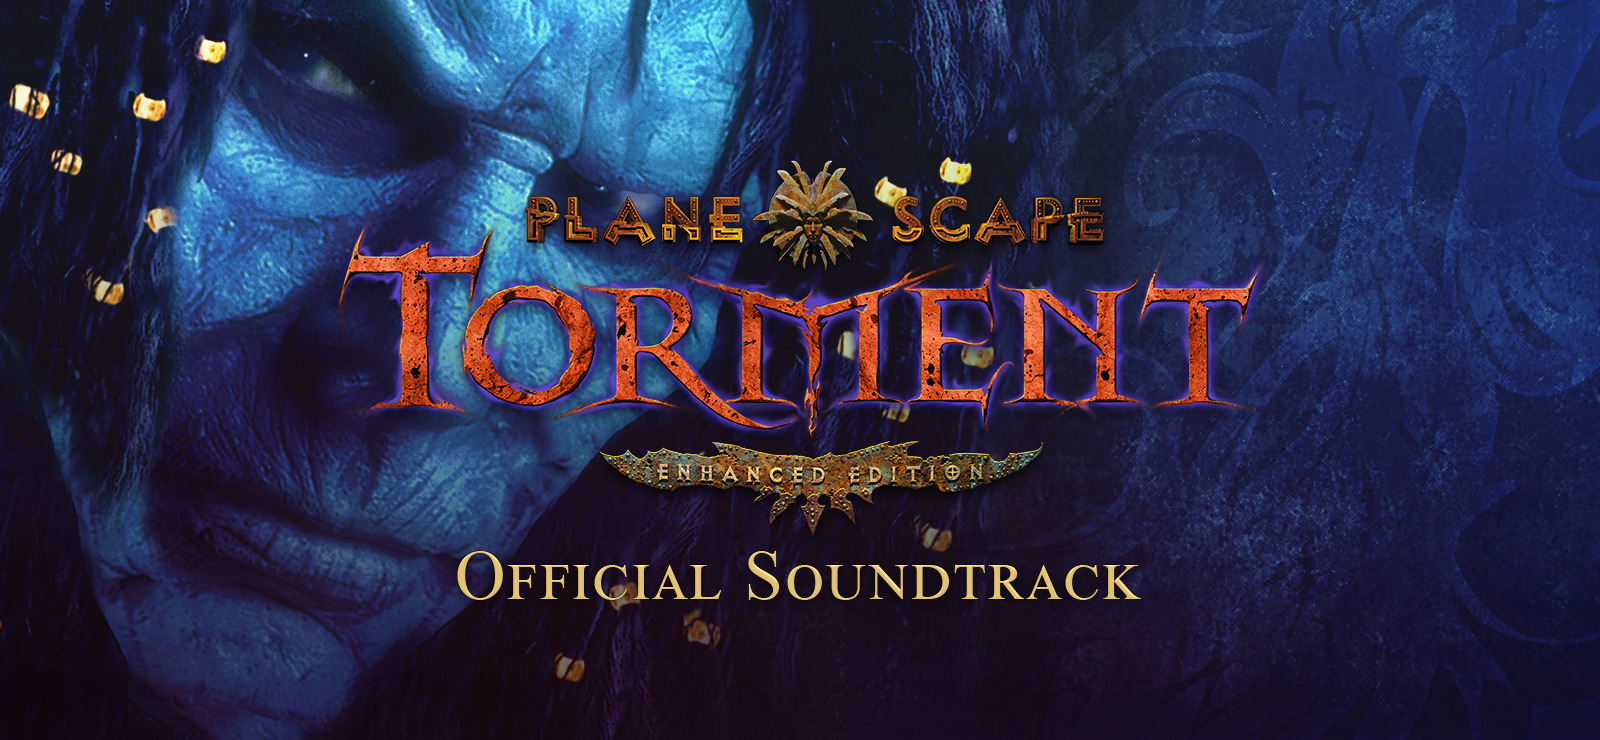 Planescape: Torment: Enhanced Edition on Soundtrack Official